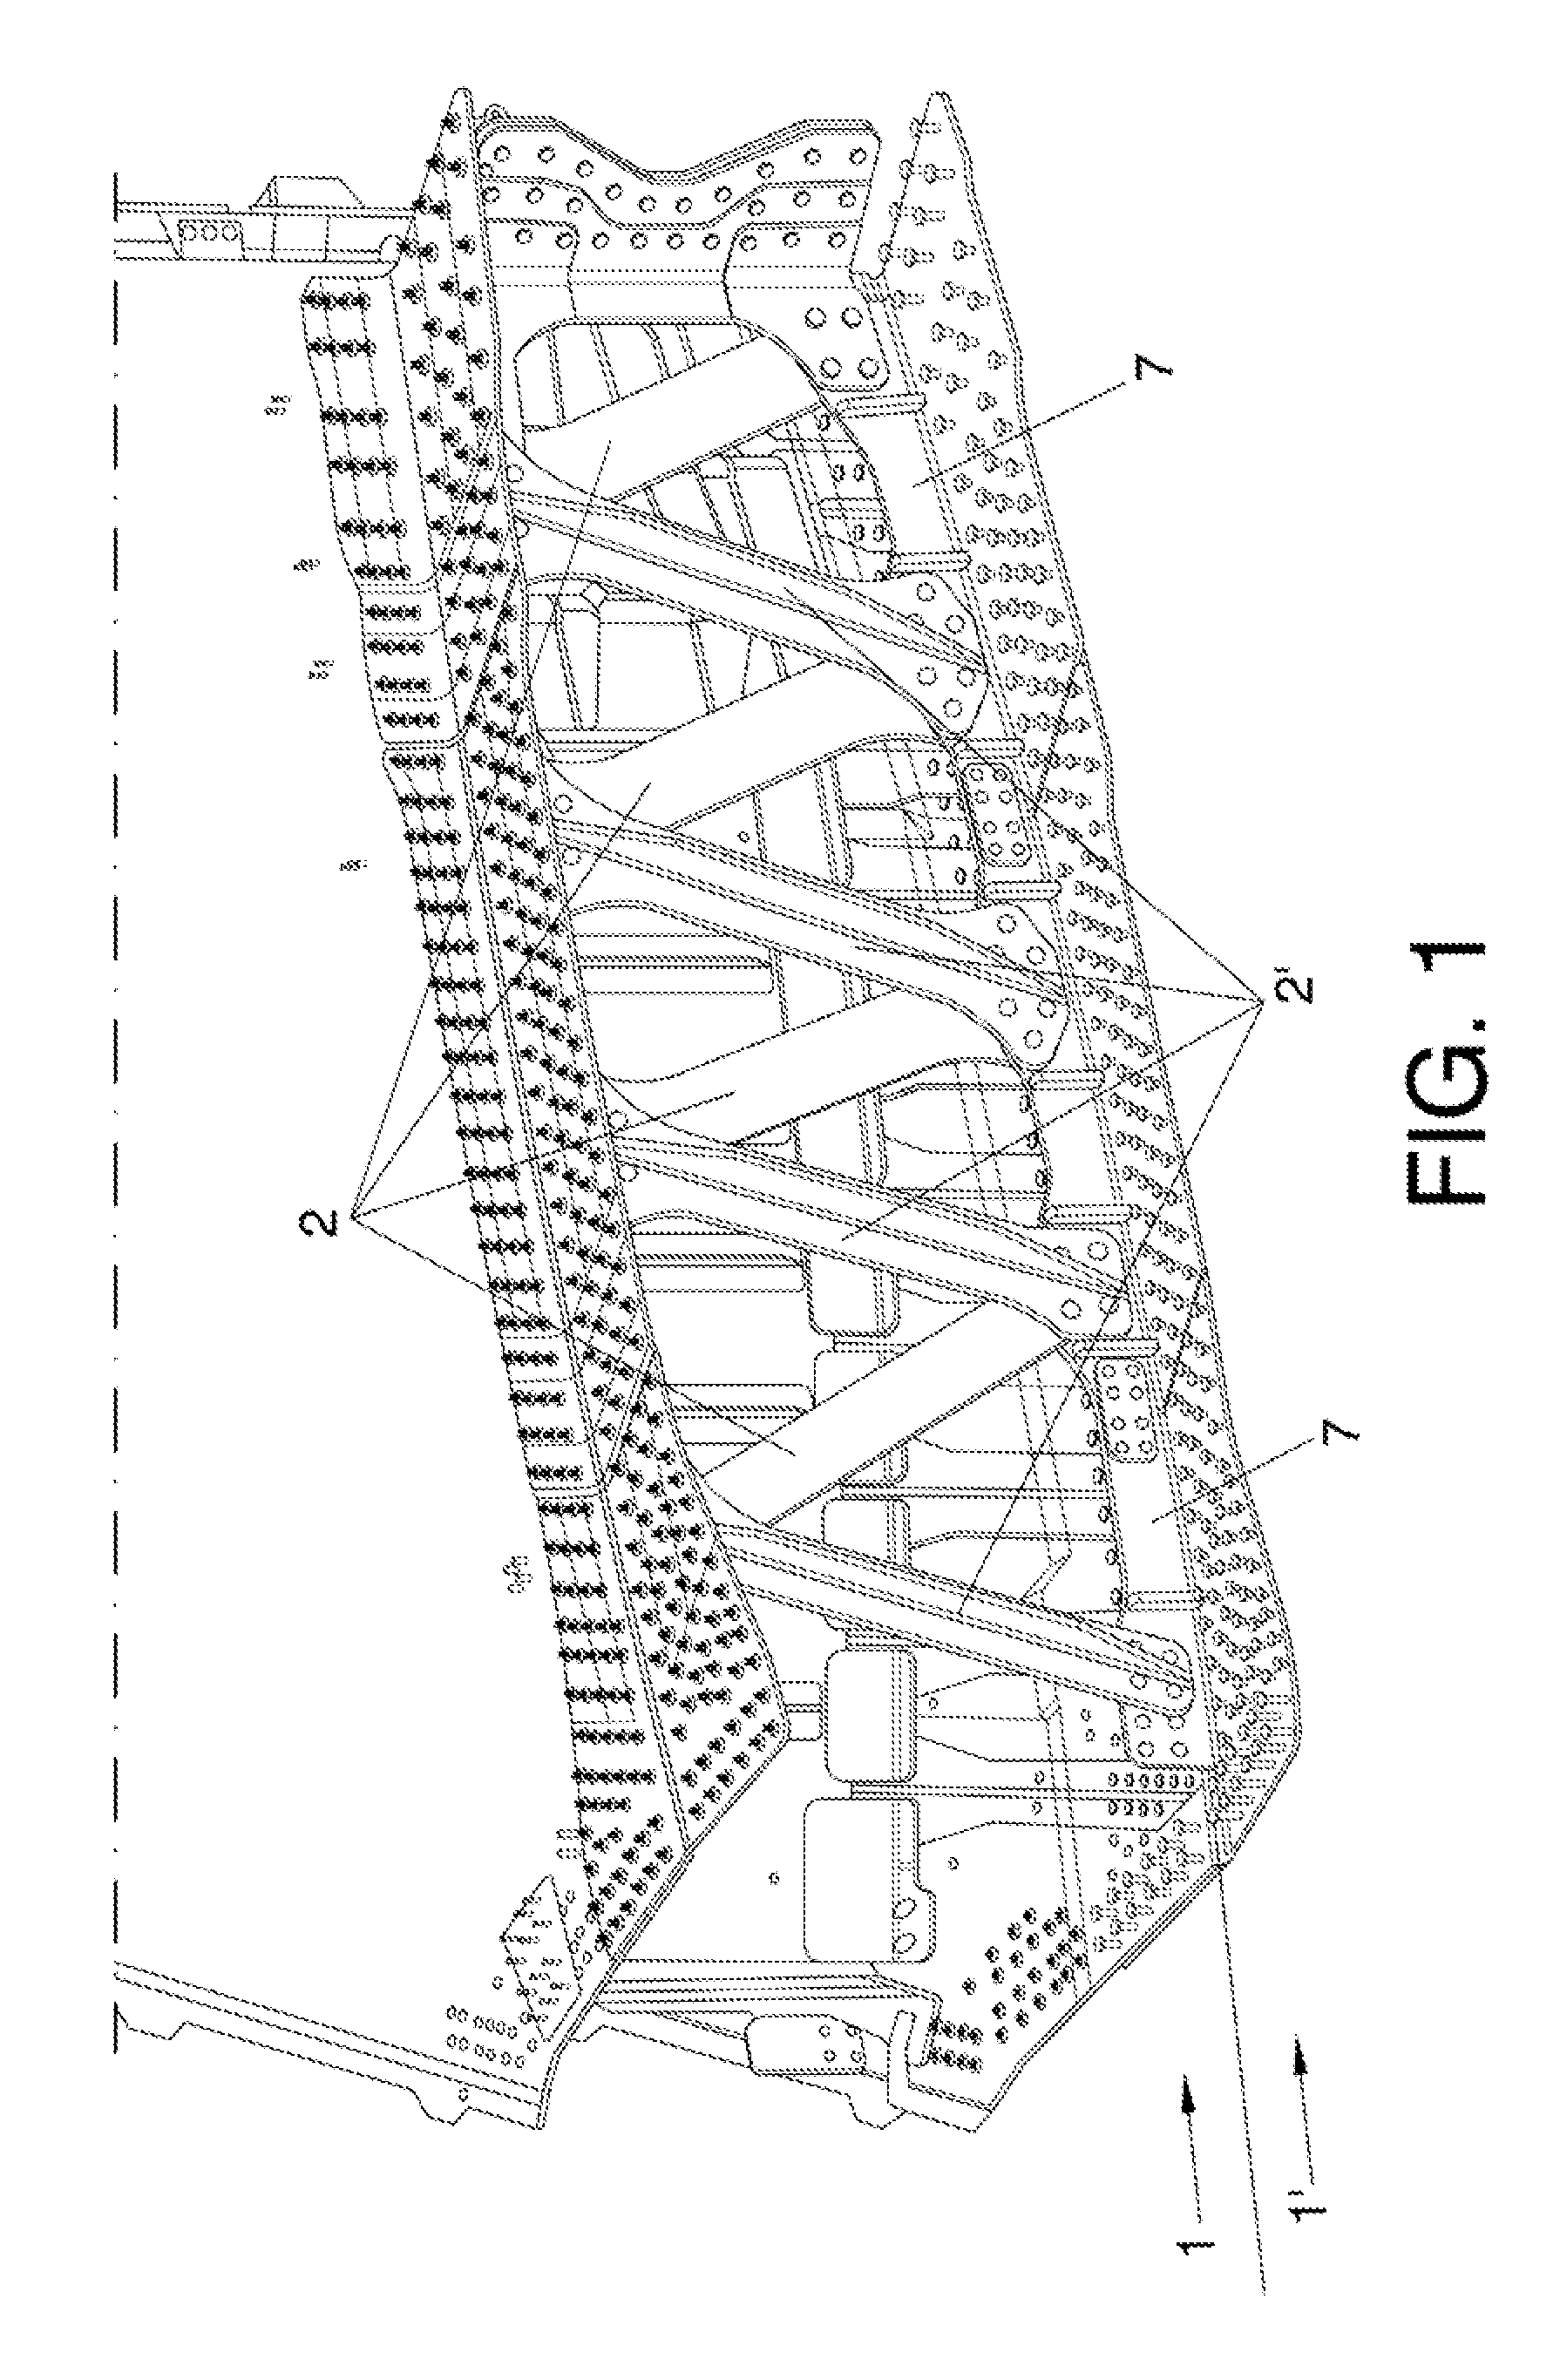 Integration system for lifting surface lateral parts in an aircraft